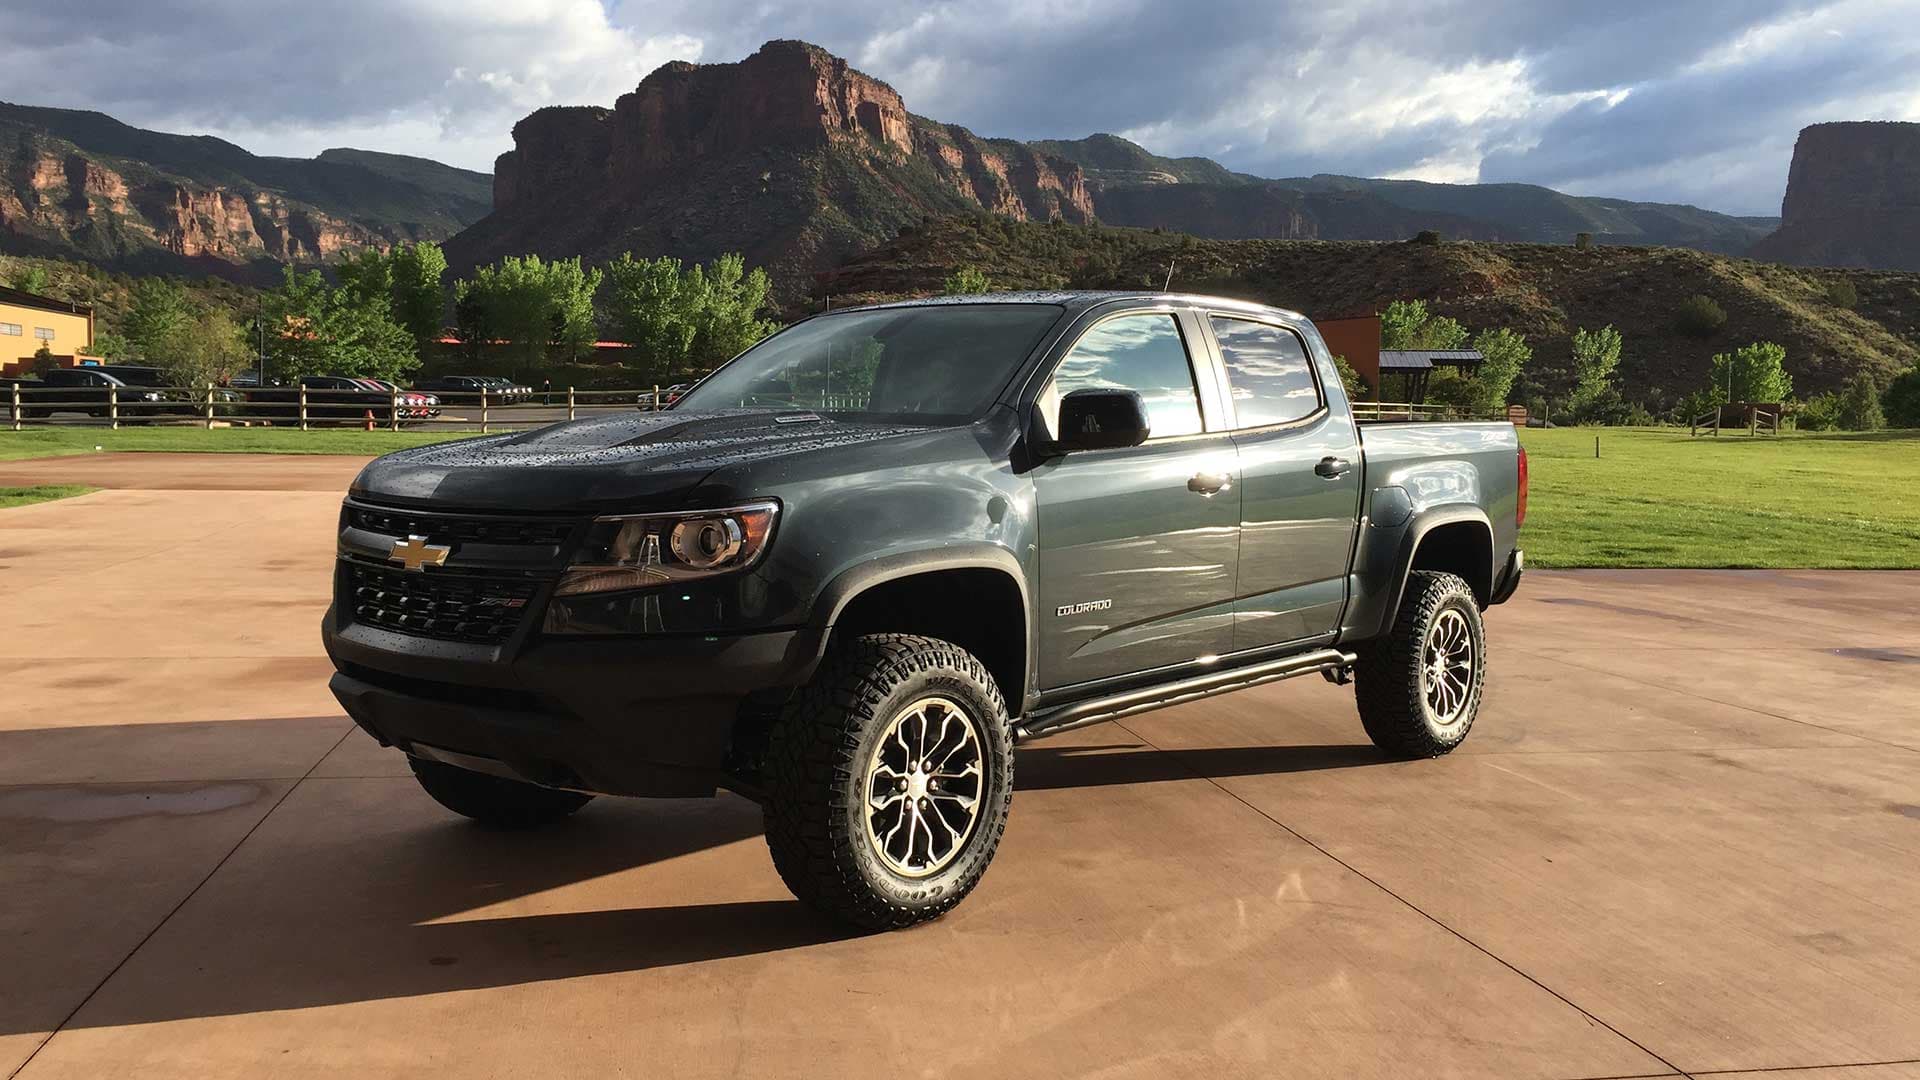 2017 Chevrolet Colorado ZR2 Review: Finally, a Right-Sized Off-Road Pickup Truck Warrior